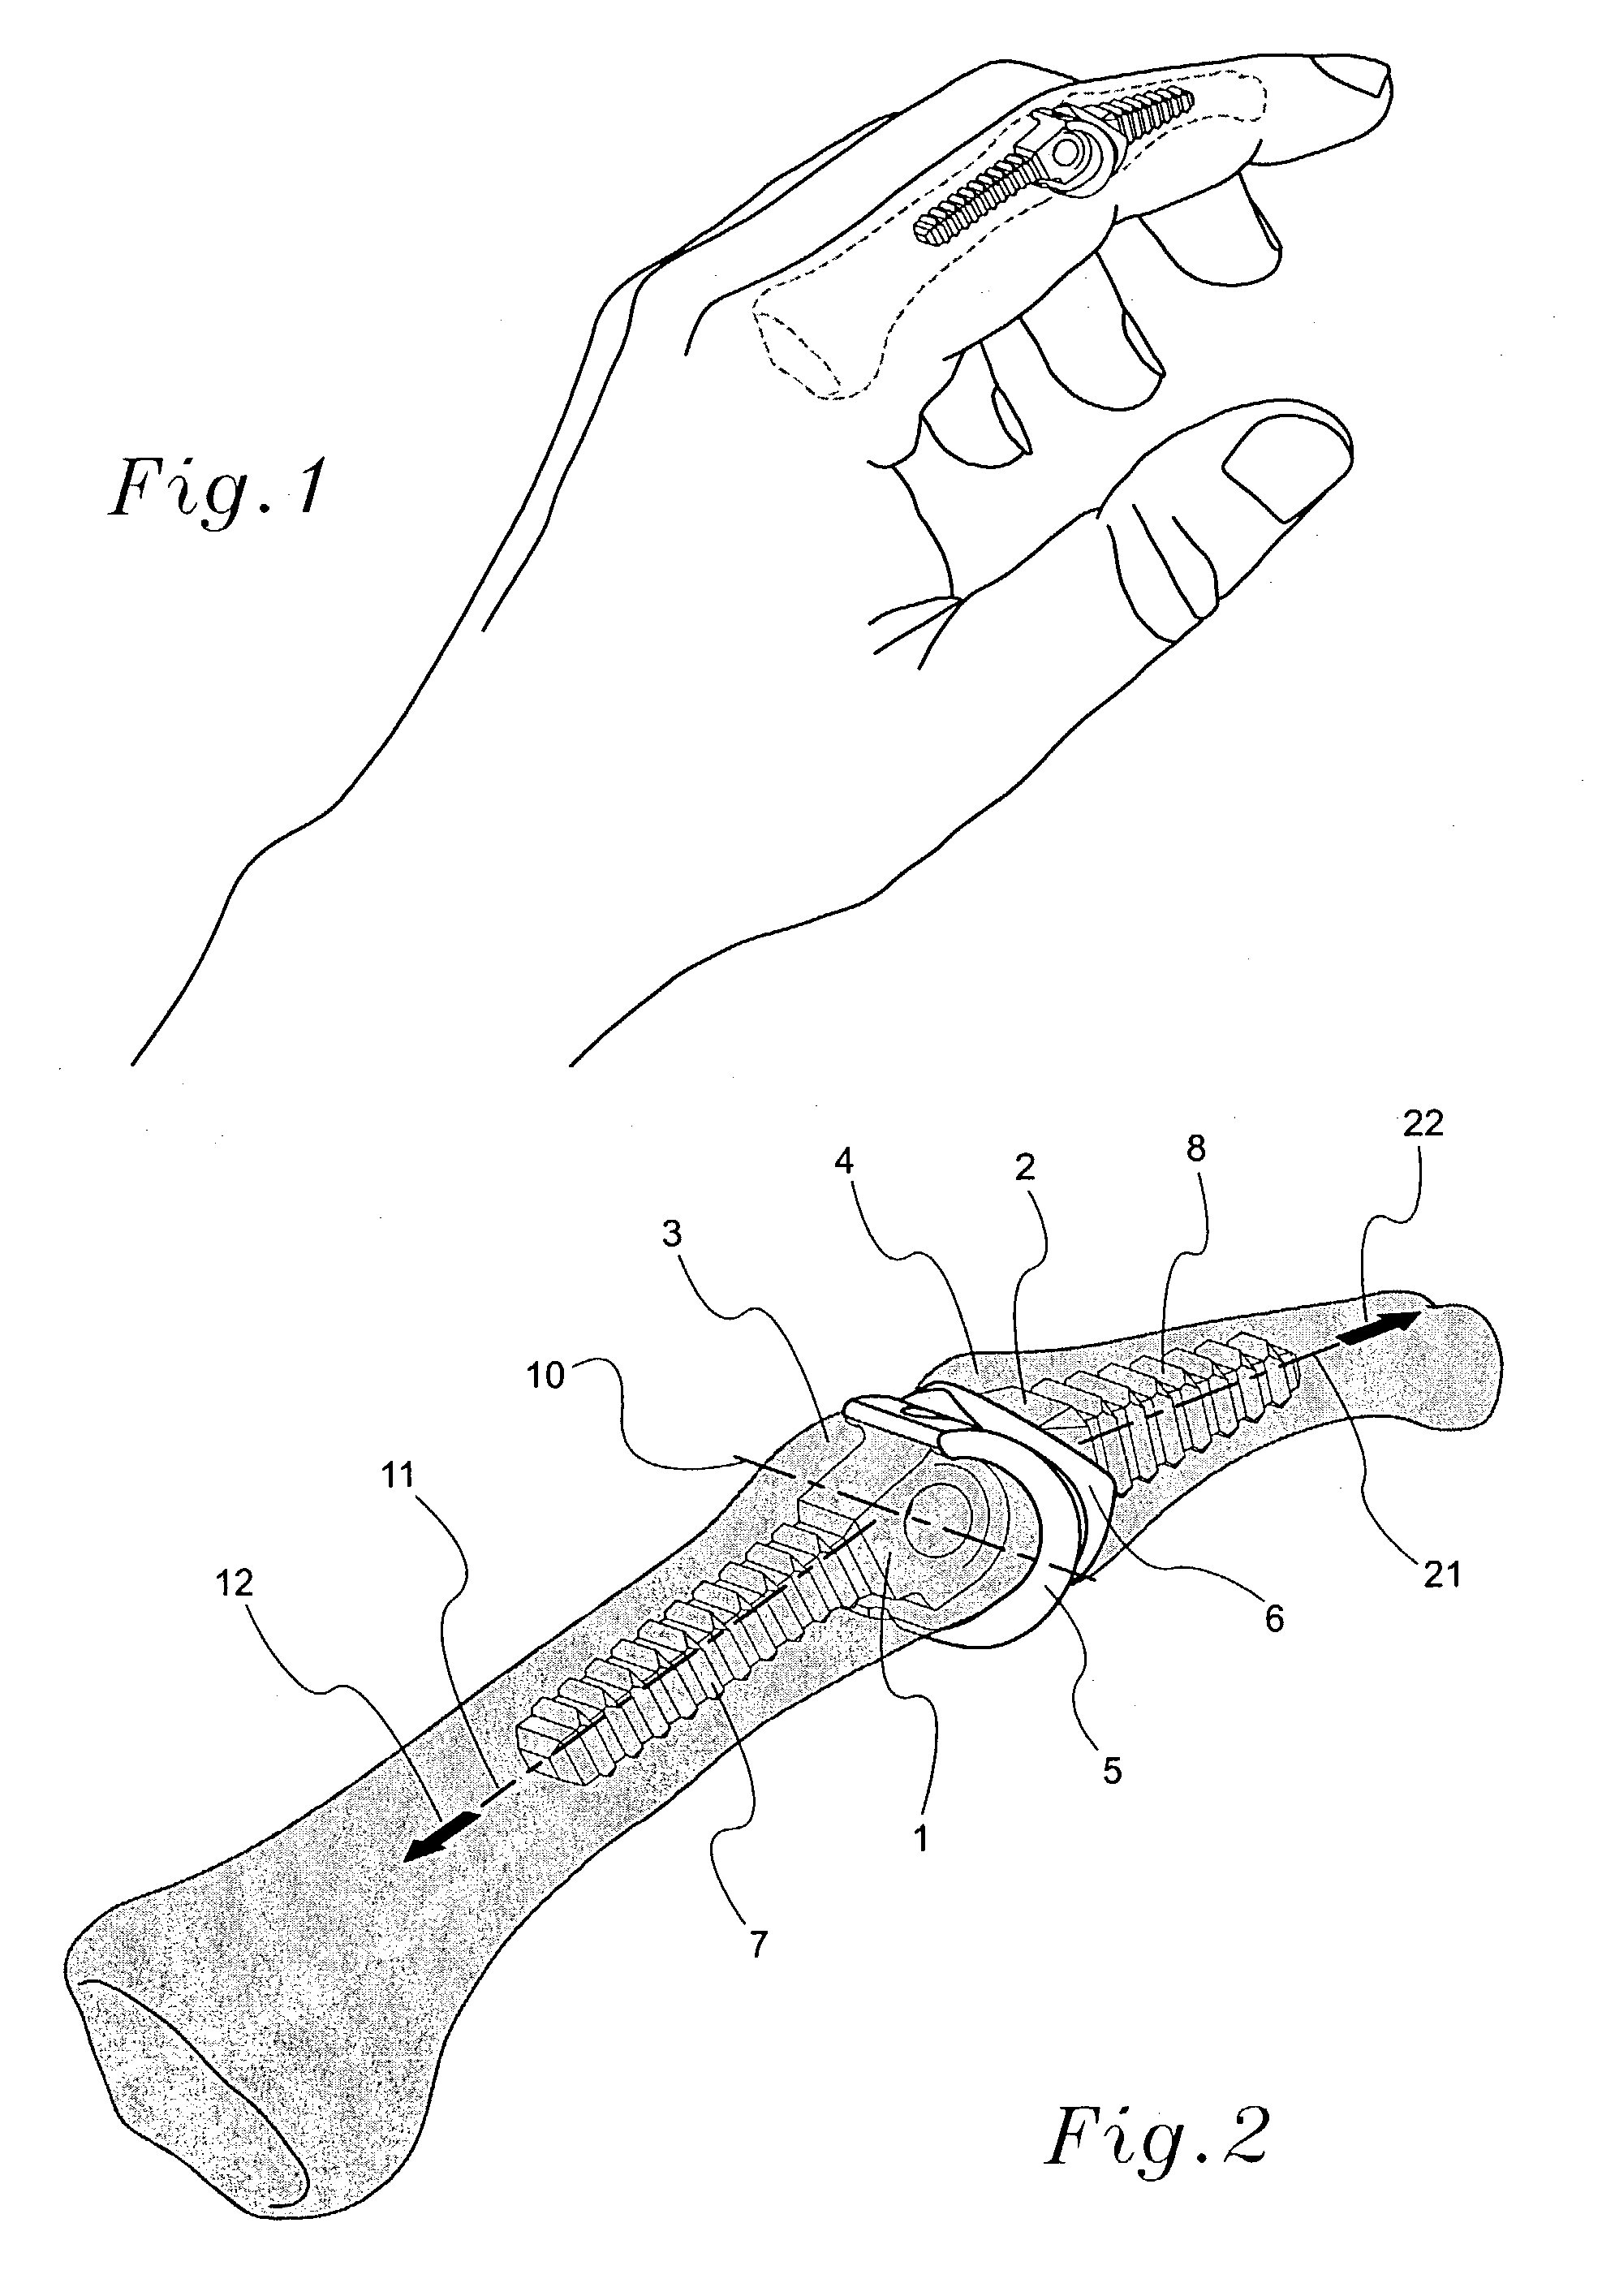 Prosthetic device and method for total joint replacement in small joint arthroplasty